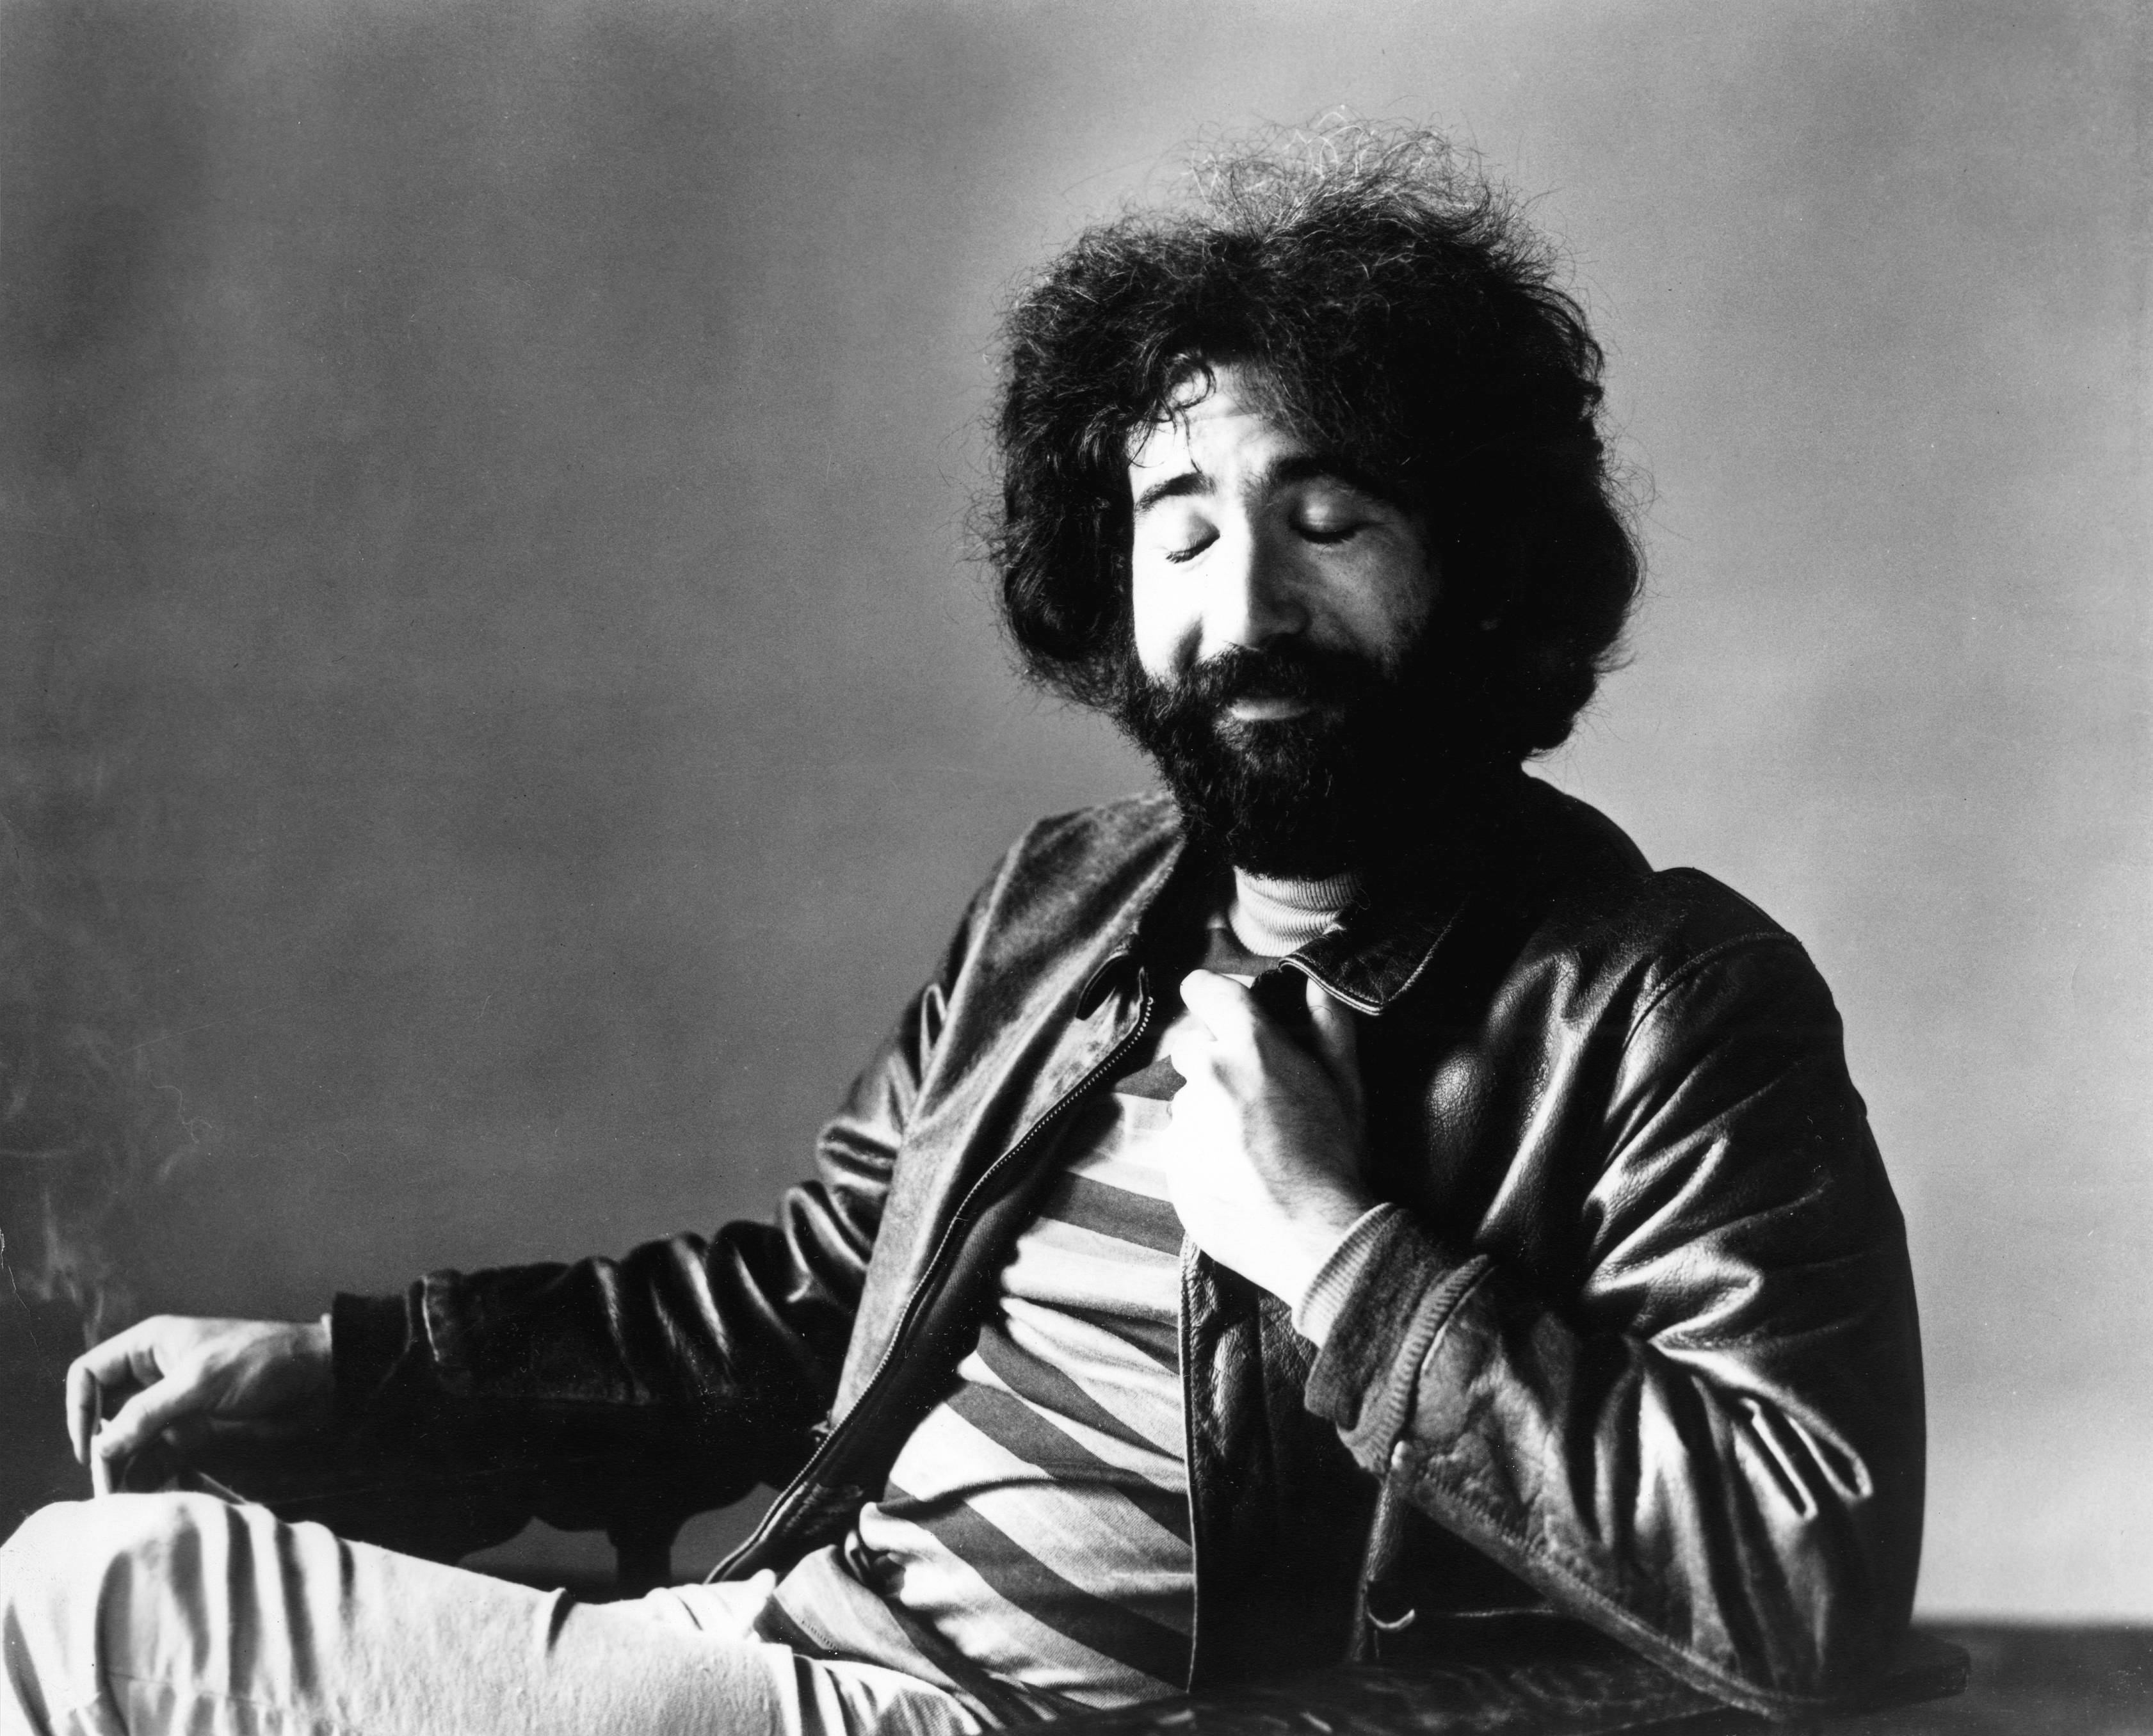 The Long, Strange Trip Jerry Garcia and the Grateful Dead forged a completely unique musical identity, playing thousands of concerts over a 30-year period. Though Garcia's death in August 1995 effectively ended the band's touring days, the Dead's music and cultural influence have continued to grow. Digital copies of the band's concerts continue to sell briskly via iTunes and fan sites, while a Hollywood biopic about Garcia is in the works, and a pair of Deadhead marketing experts have just released a book that posits the band as an ideal model for marketing in the Internet age. Oh, if that's not enough, Cherry Garcia remains Ben and Jerry's No. 1–selling flavor.